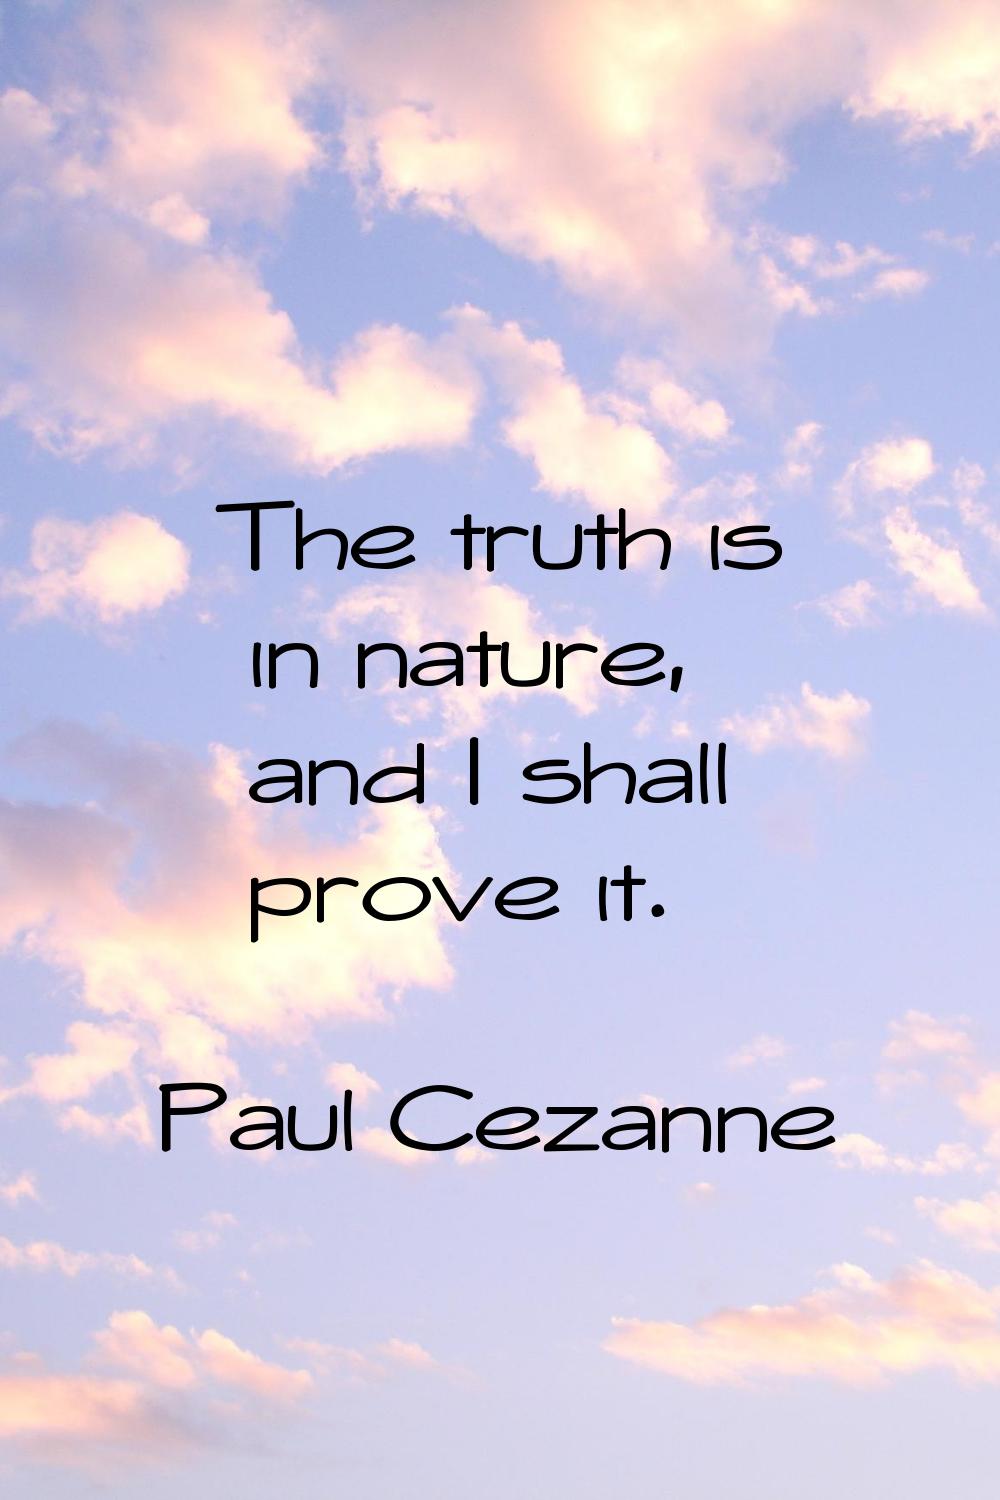 The truth is in nature, and I shall prove it.